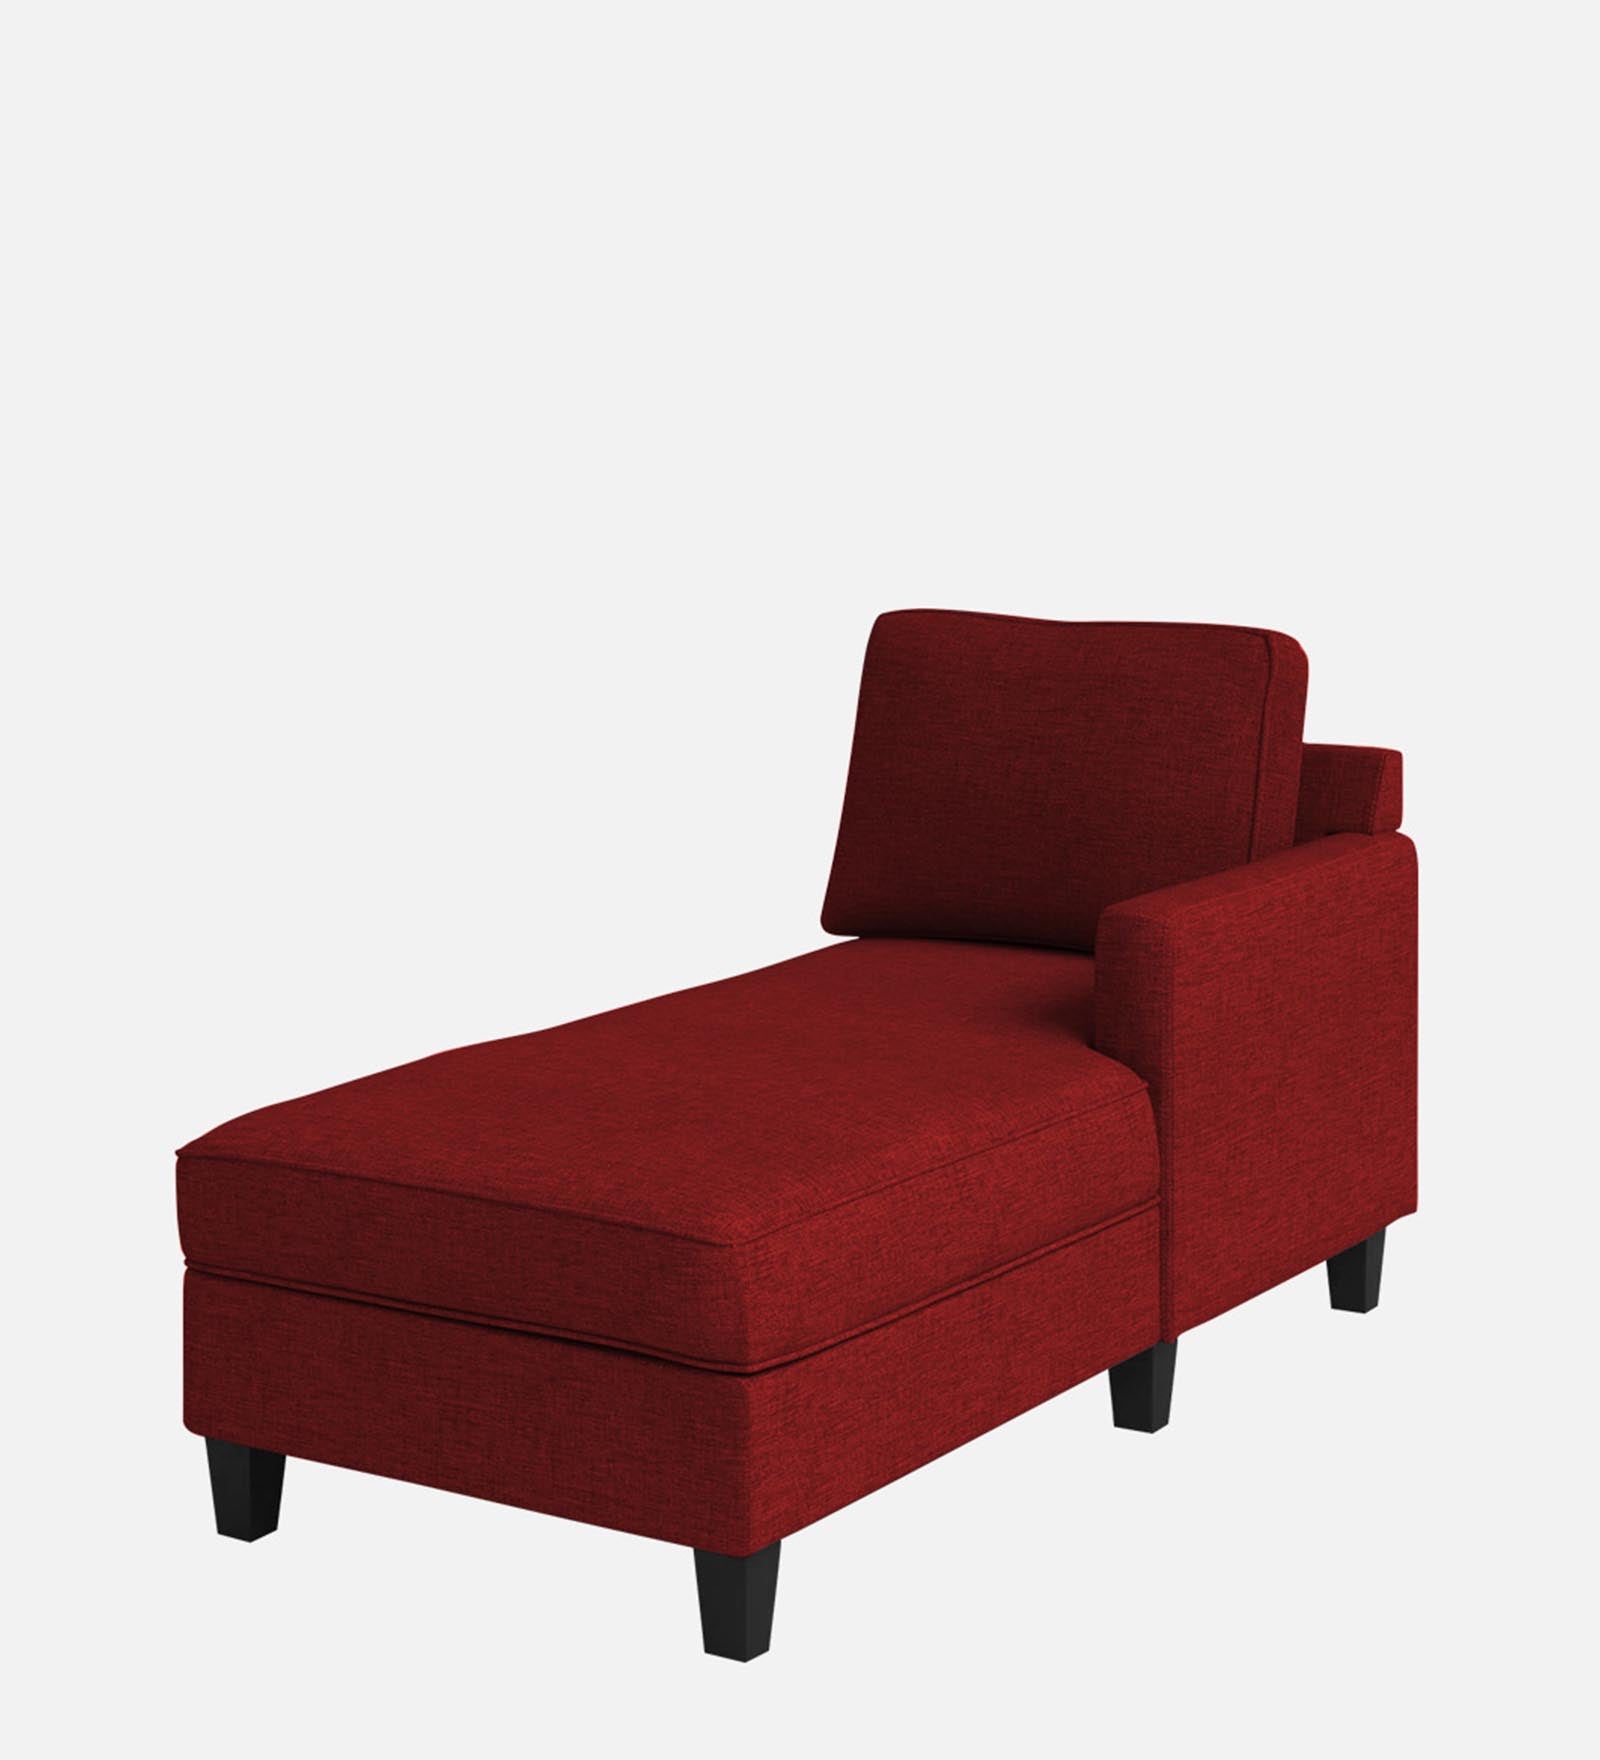 Royee Fabric RHS Chaise Lounger In Blood Maroon Colour With Storage